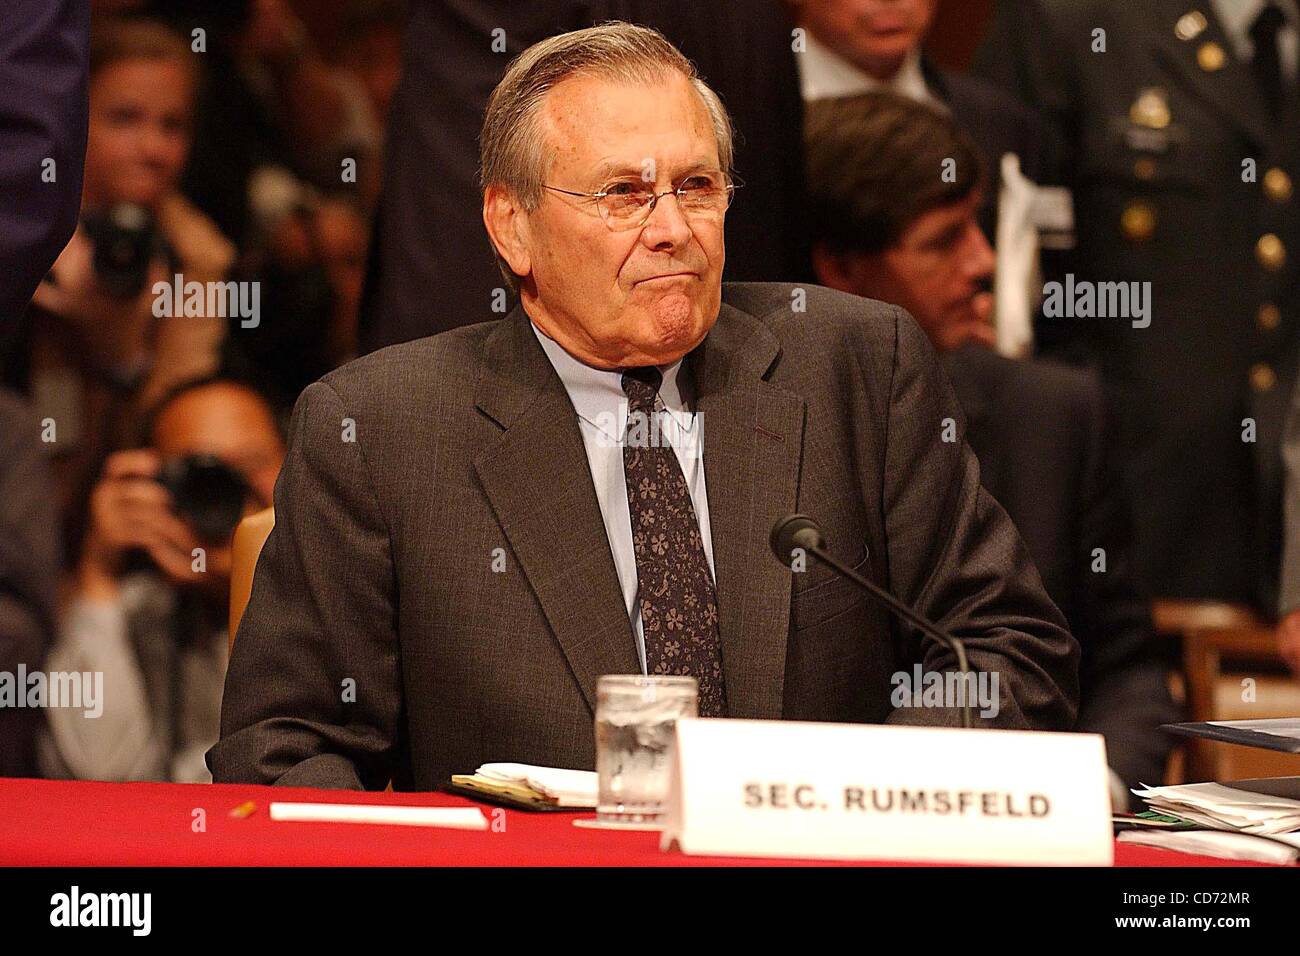 May 7, 2004 - Washington, District of Columbia, U.S. - I8729CB.SECRETARY DONALD RUMSFELD AND GENERAL RICHARD B MEYERS TESTIFING BEFORE THE SENATE ARMED SERVICES COMMITTEE TO AFFIRM THAT THE PHOTOGRAPHS OF ABUSE IN ABU GHRAIB PRISON OFFENDED AND OUTRAGED EVERYONE IN THE DEFENSE DEPARTMENT, WASHINGTON Stock Photo